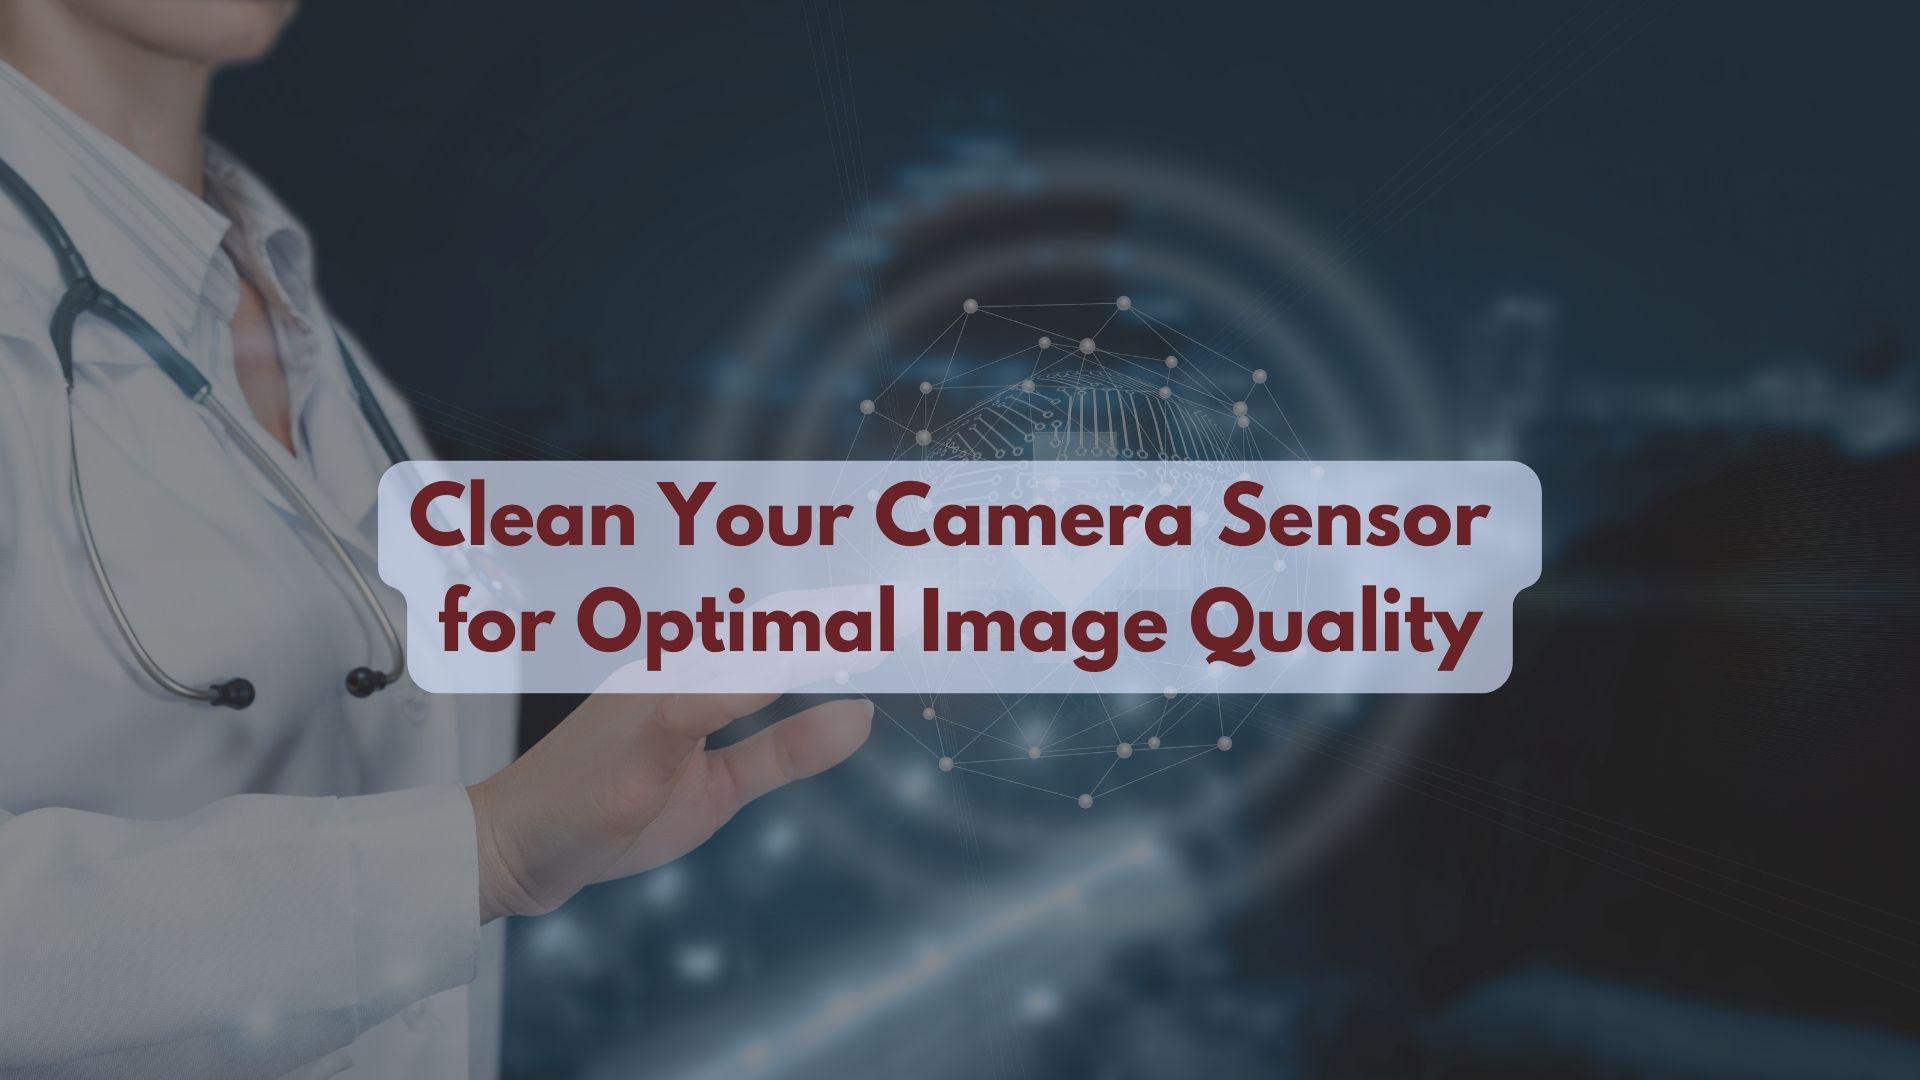 How to Clean Your Camera Sensor for Optimal Image Quality?